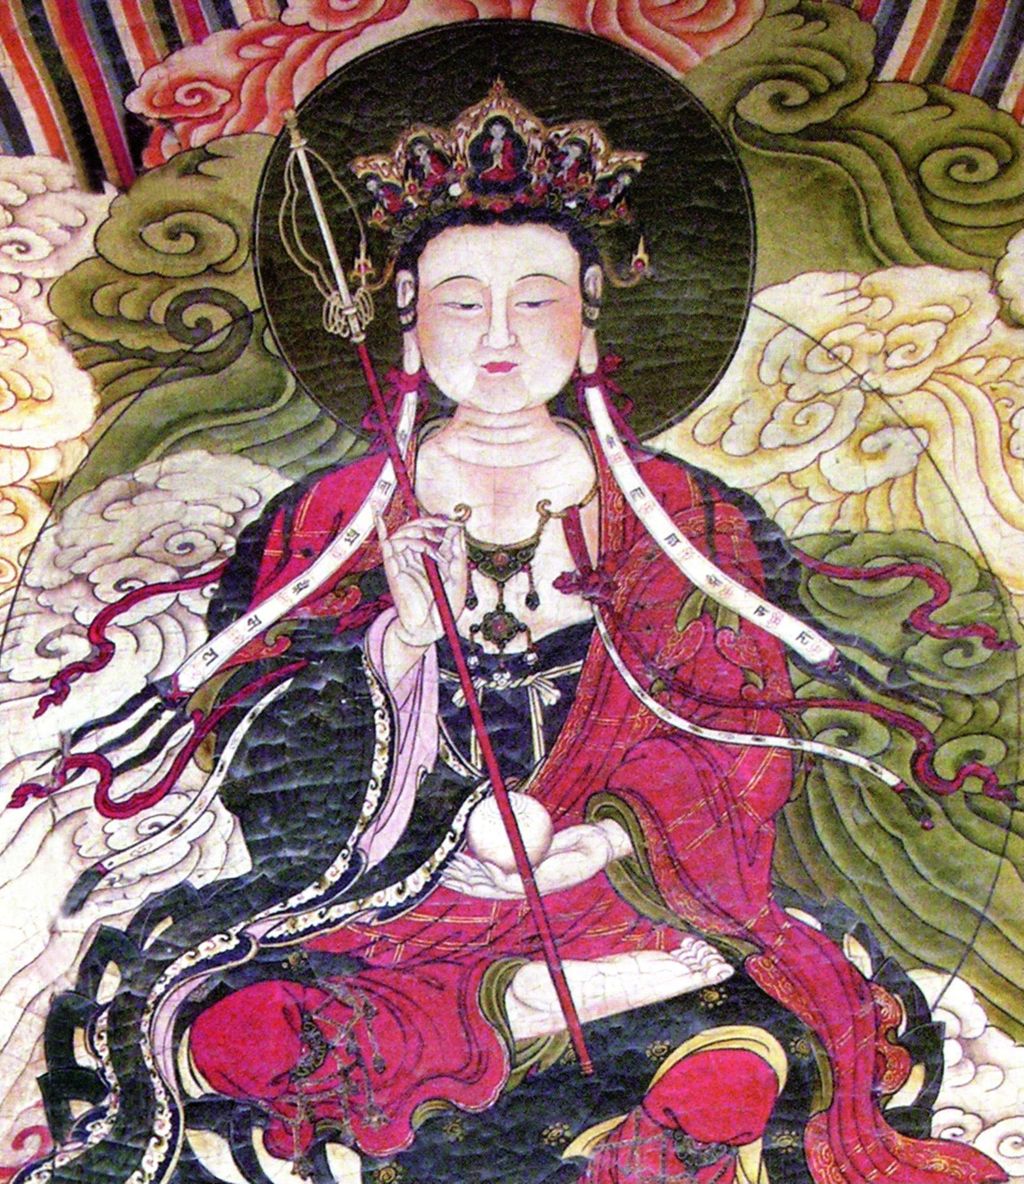 Miniature of Dizang Bodhisattva with the Ten Kings of Hell Mural from Zhihua Hall (Zhihuadian, Hall of Transforming Wisdom), Dizang